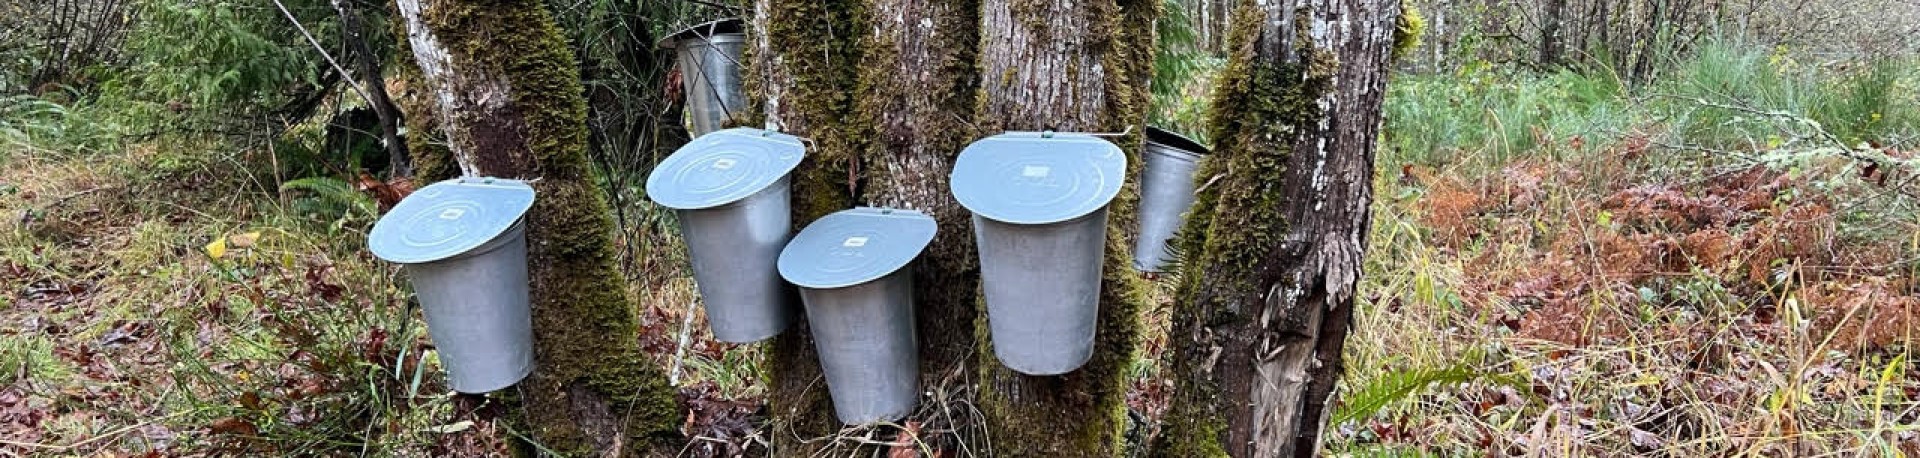 WAITLIST-Winter Maple Sugaring Class and Demonstration (in-person, outside)